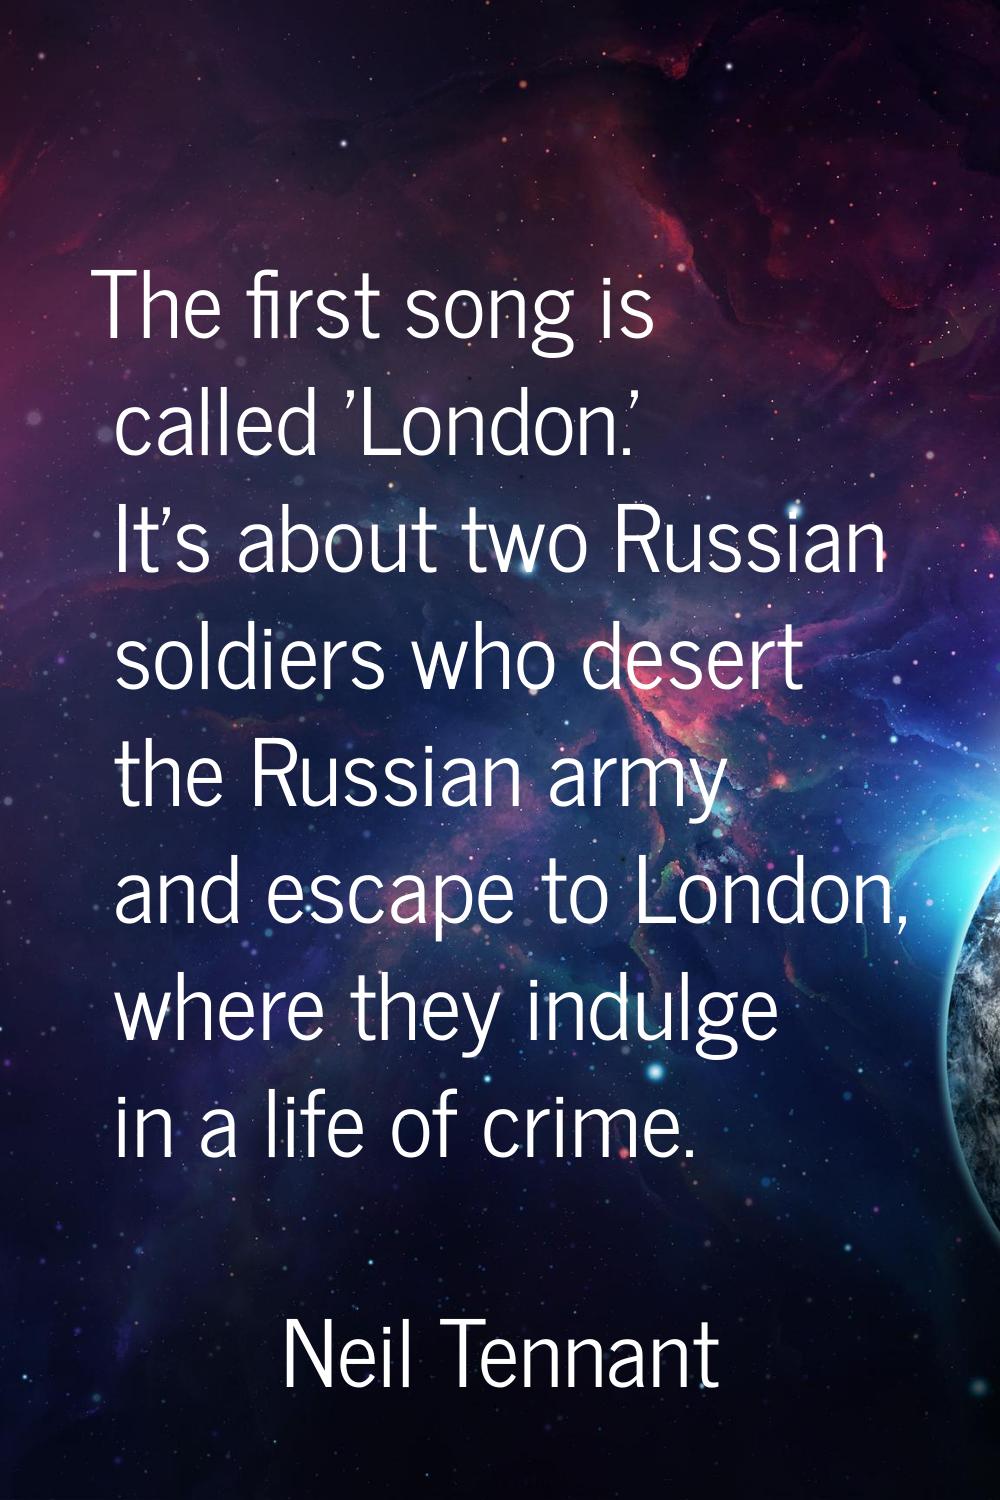 The first song is called 'London.' It's about two Russian soldiers who desert the Russian army and 